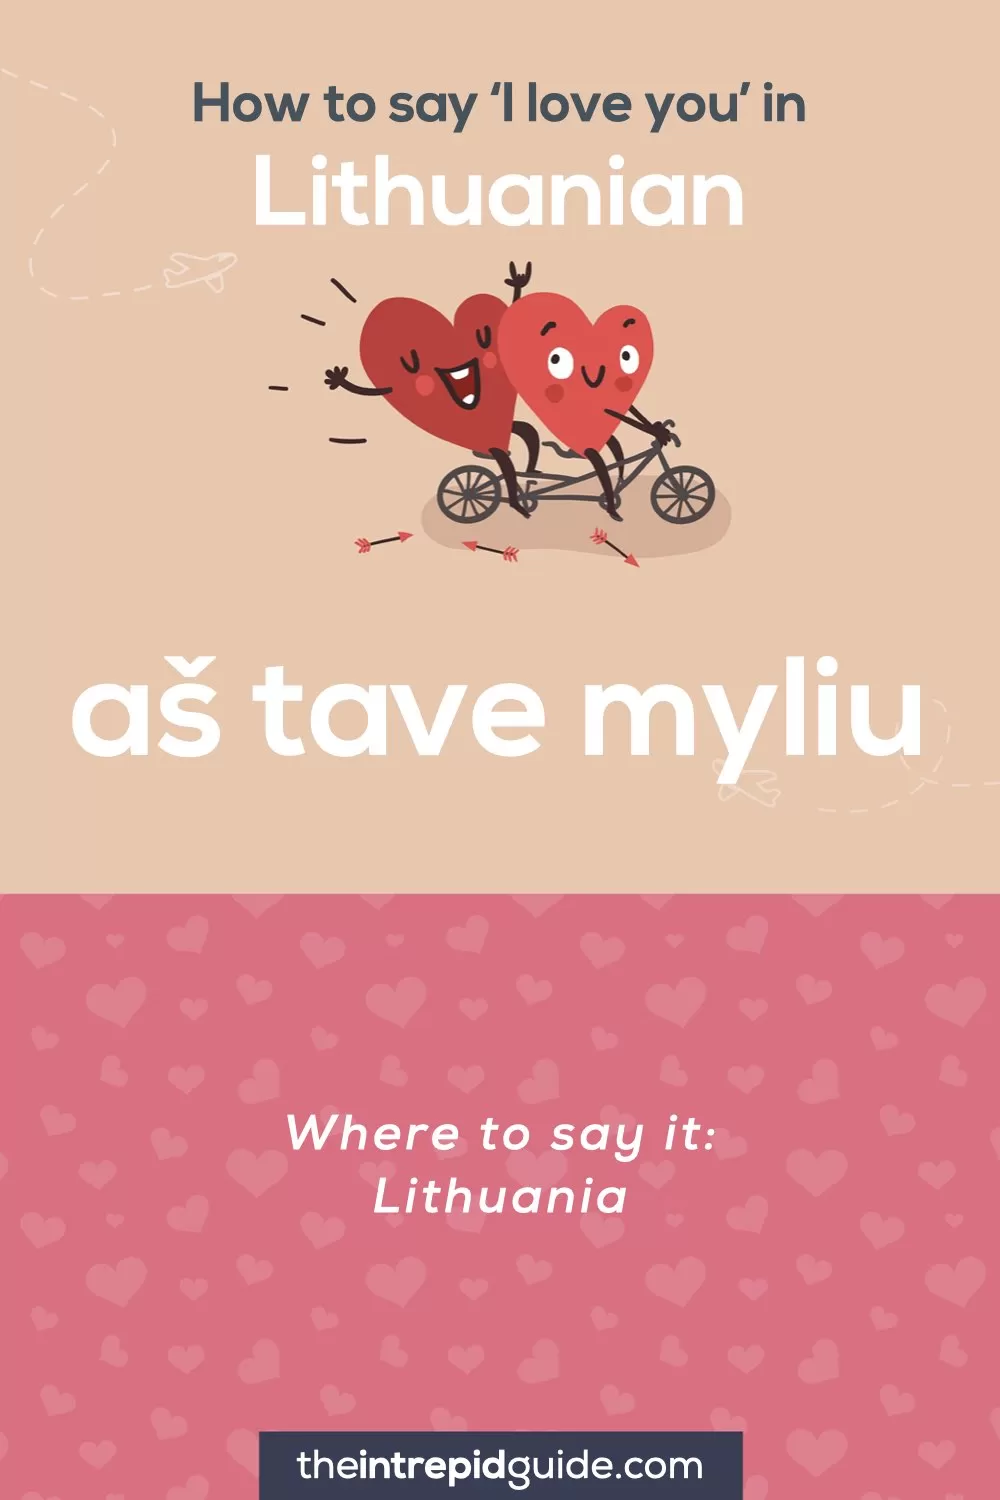 How to say I love you in different languages - Lithuanian - as tave myliu